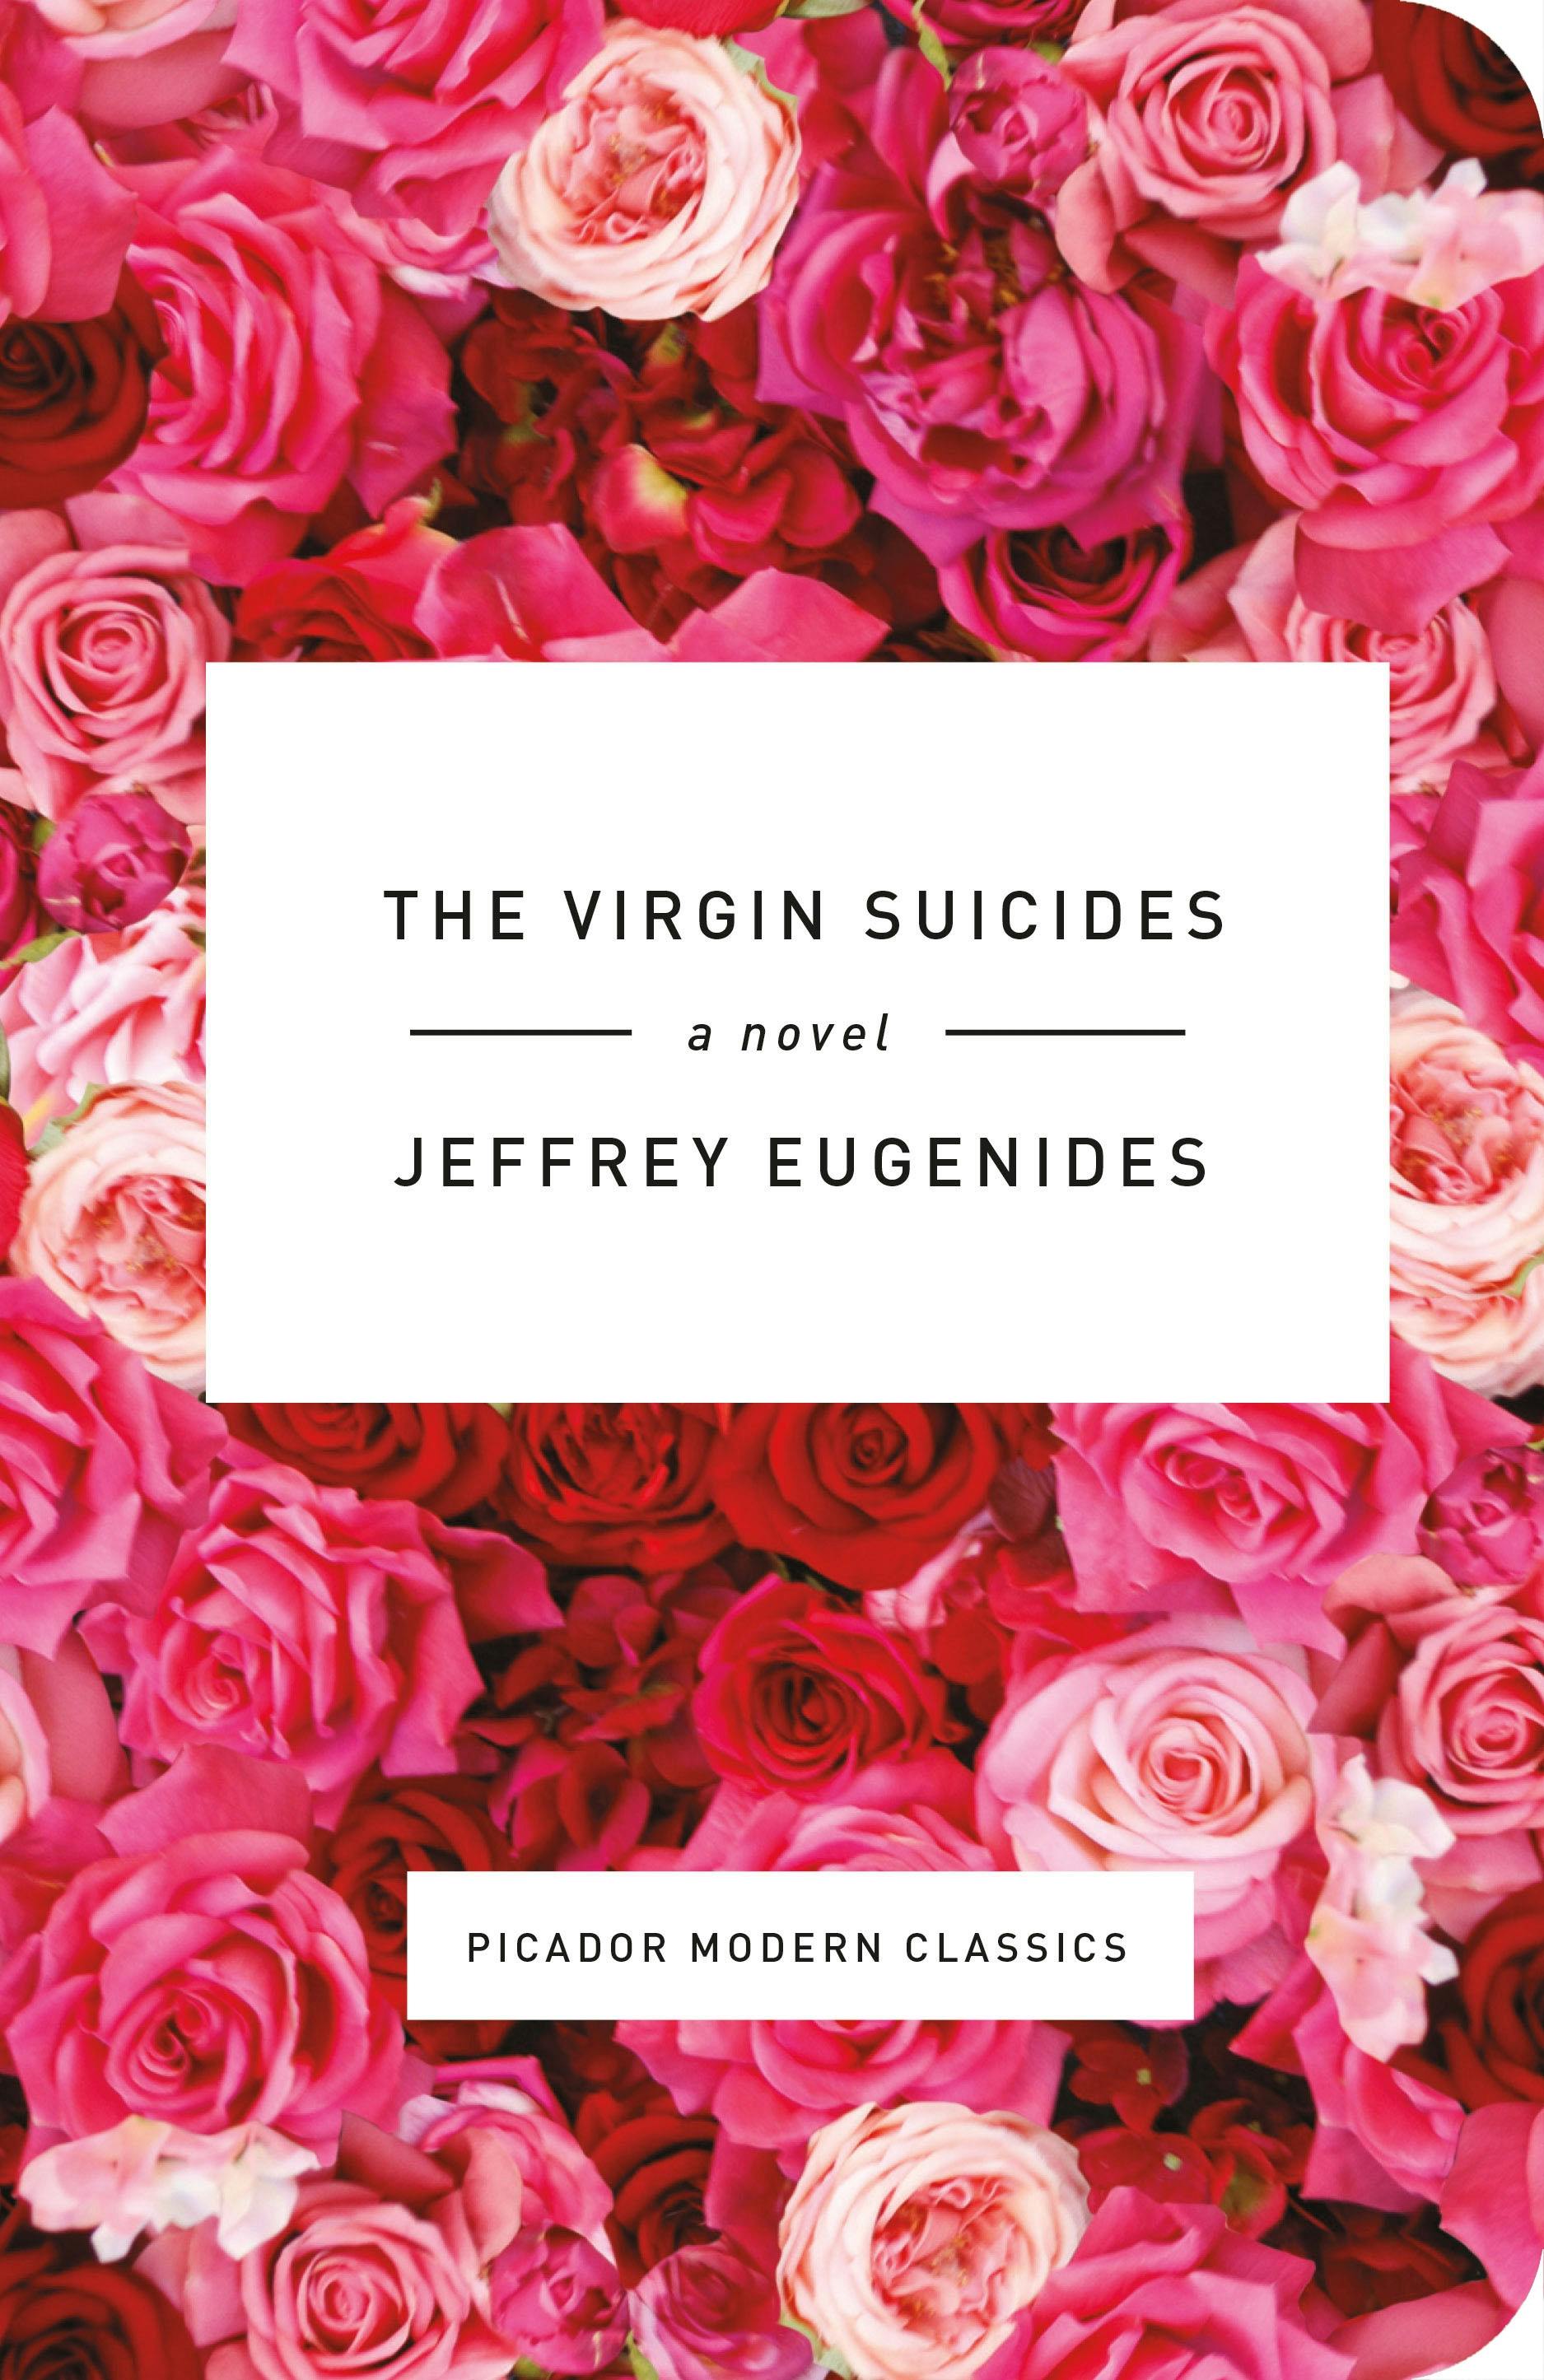 The Virgin Suicides image